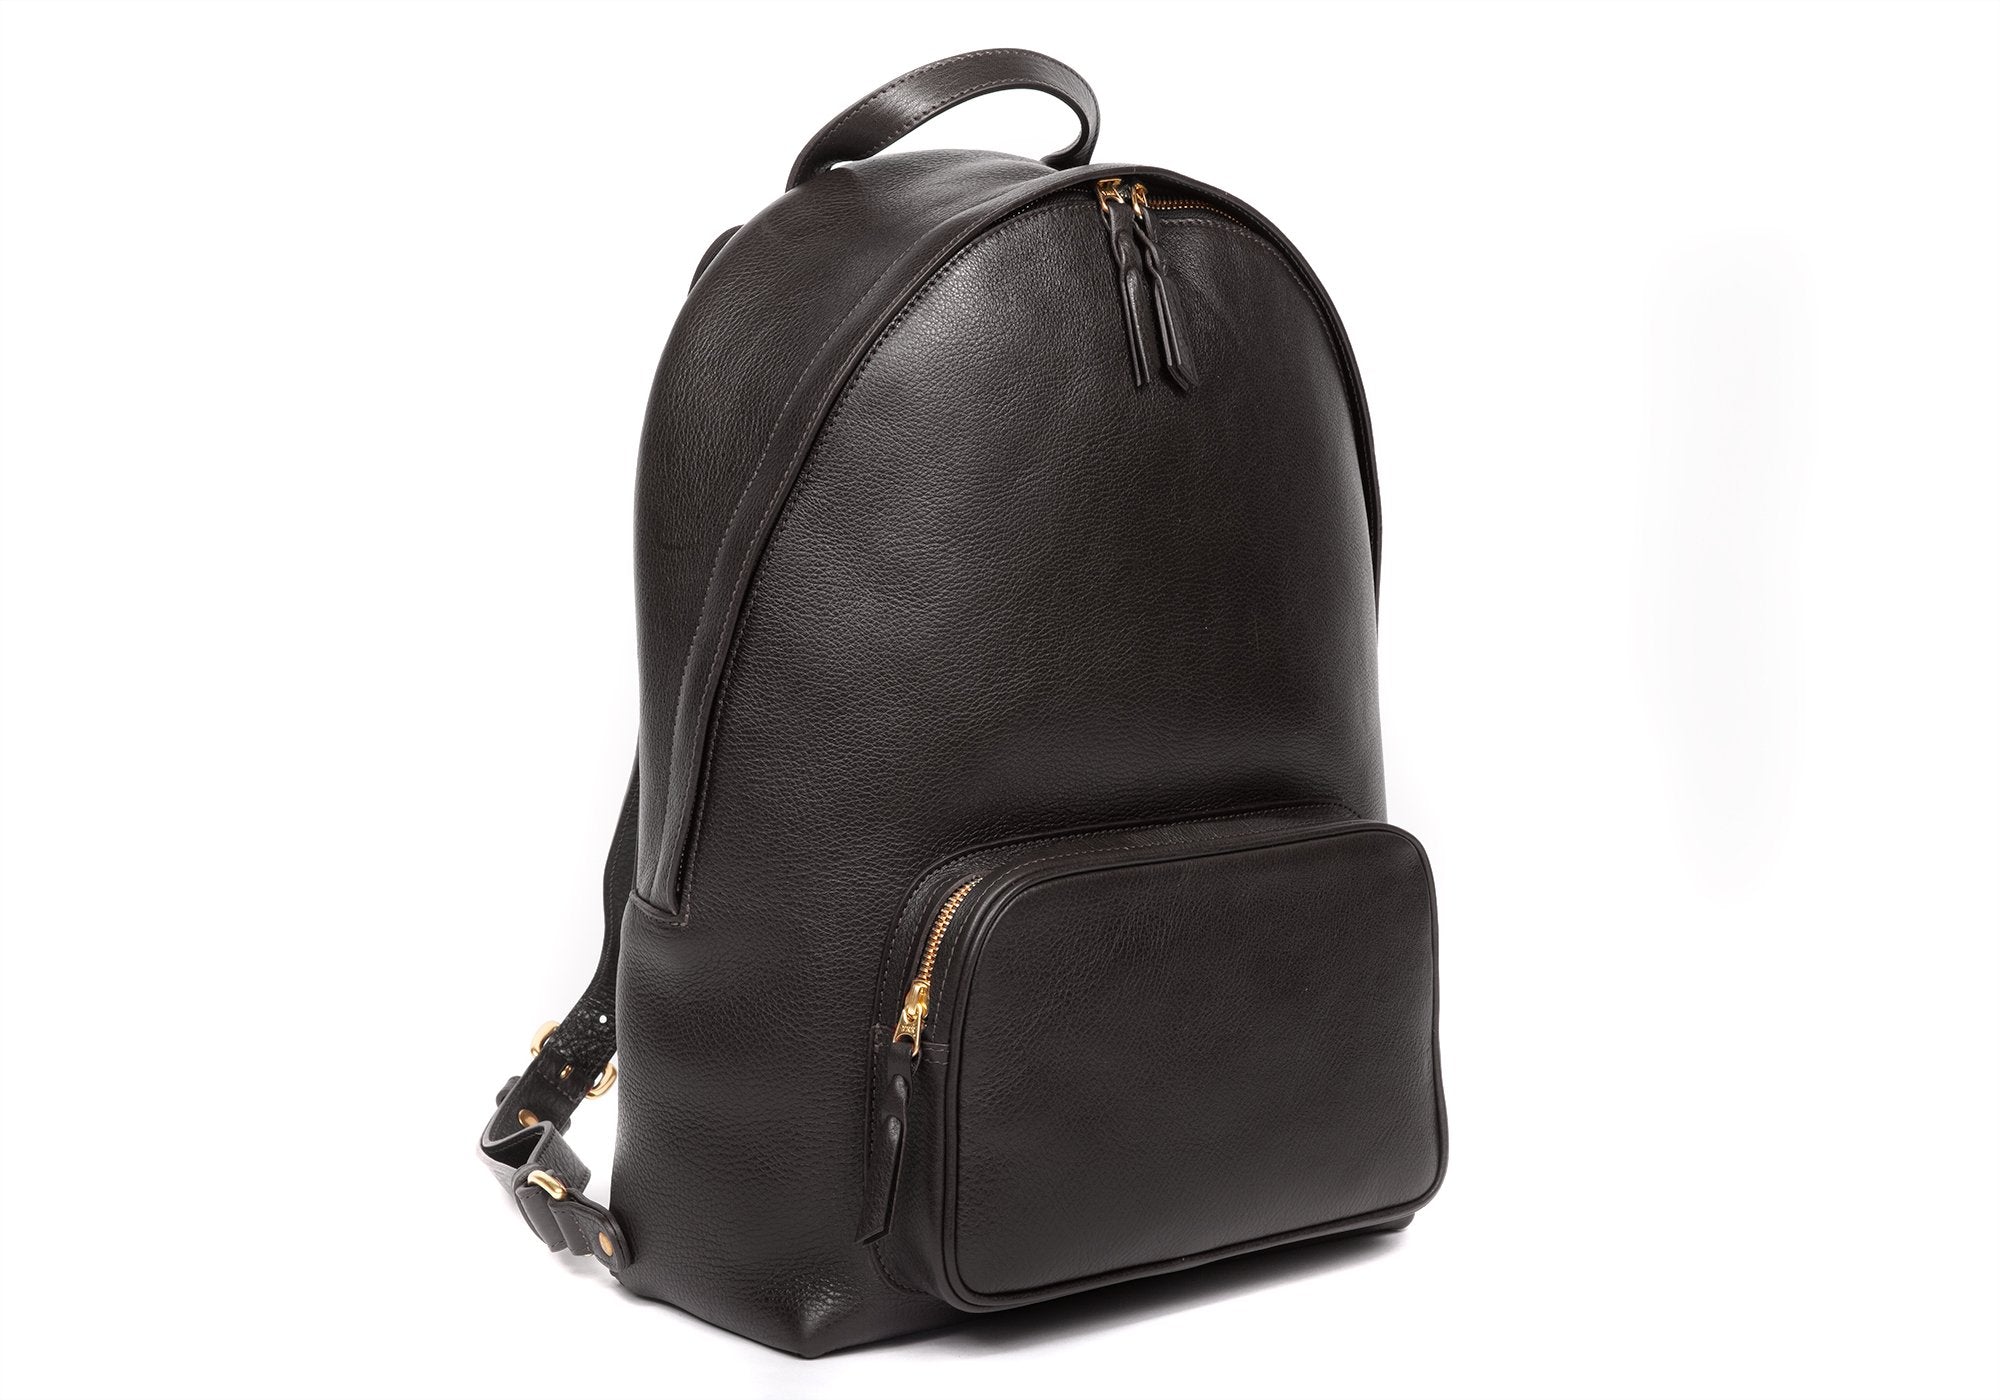 Leather Zipper Backpack - Handmade Leather Bag · Lotuff Leather